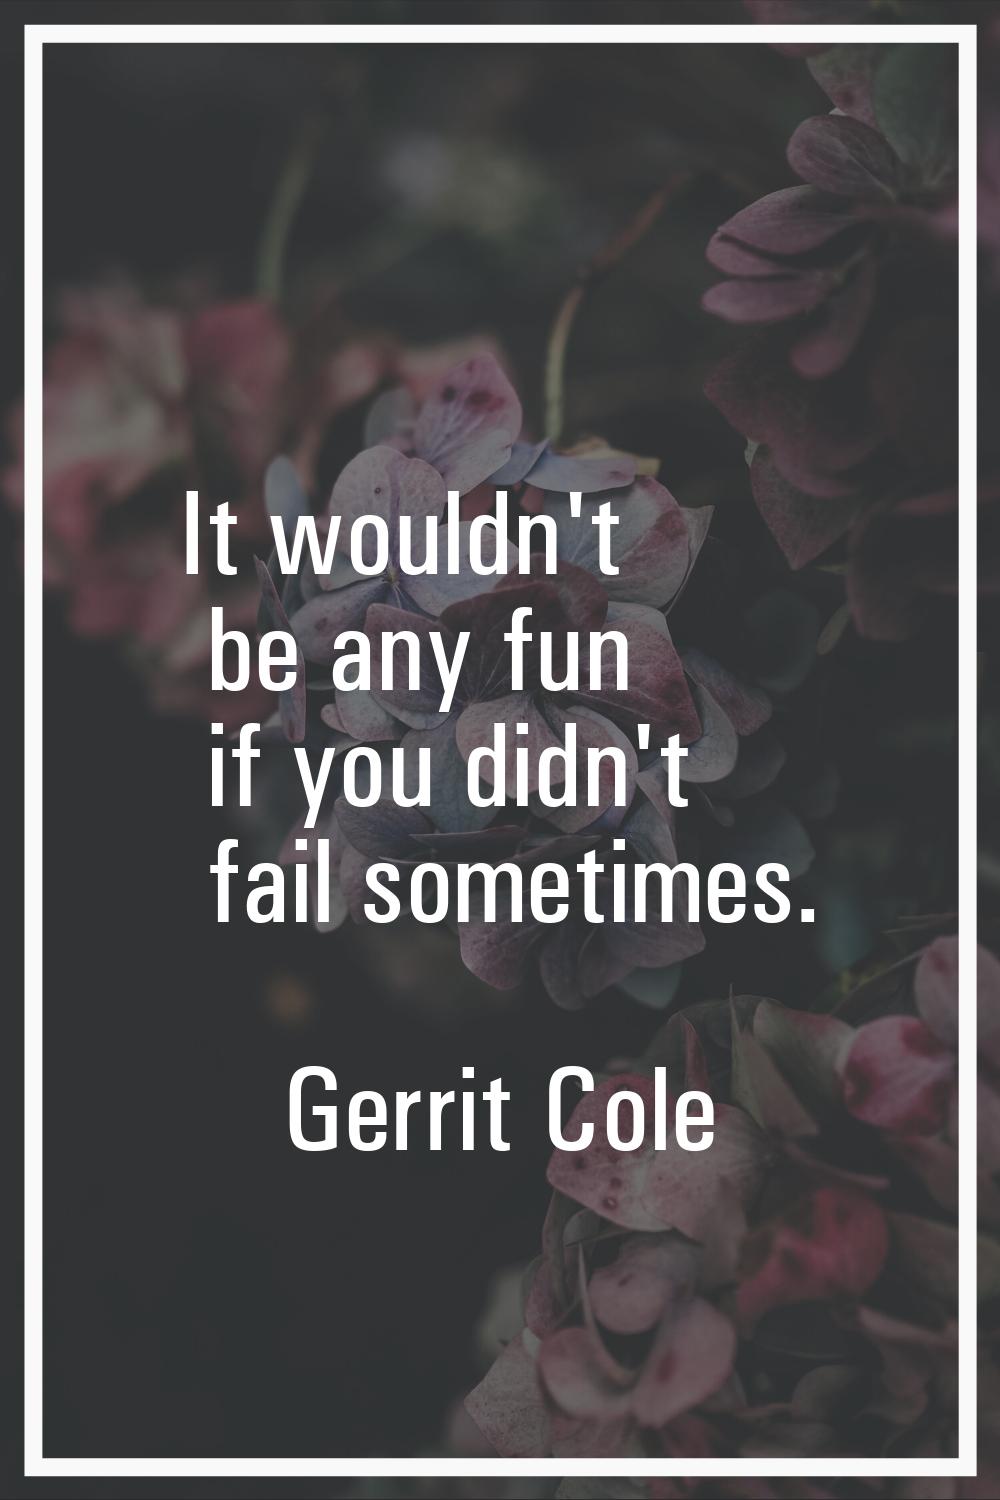 It wouldn't be any fun if you didn't fail sometimes.